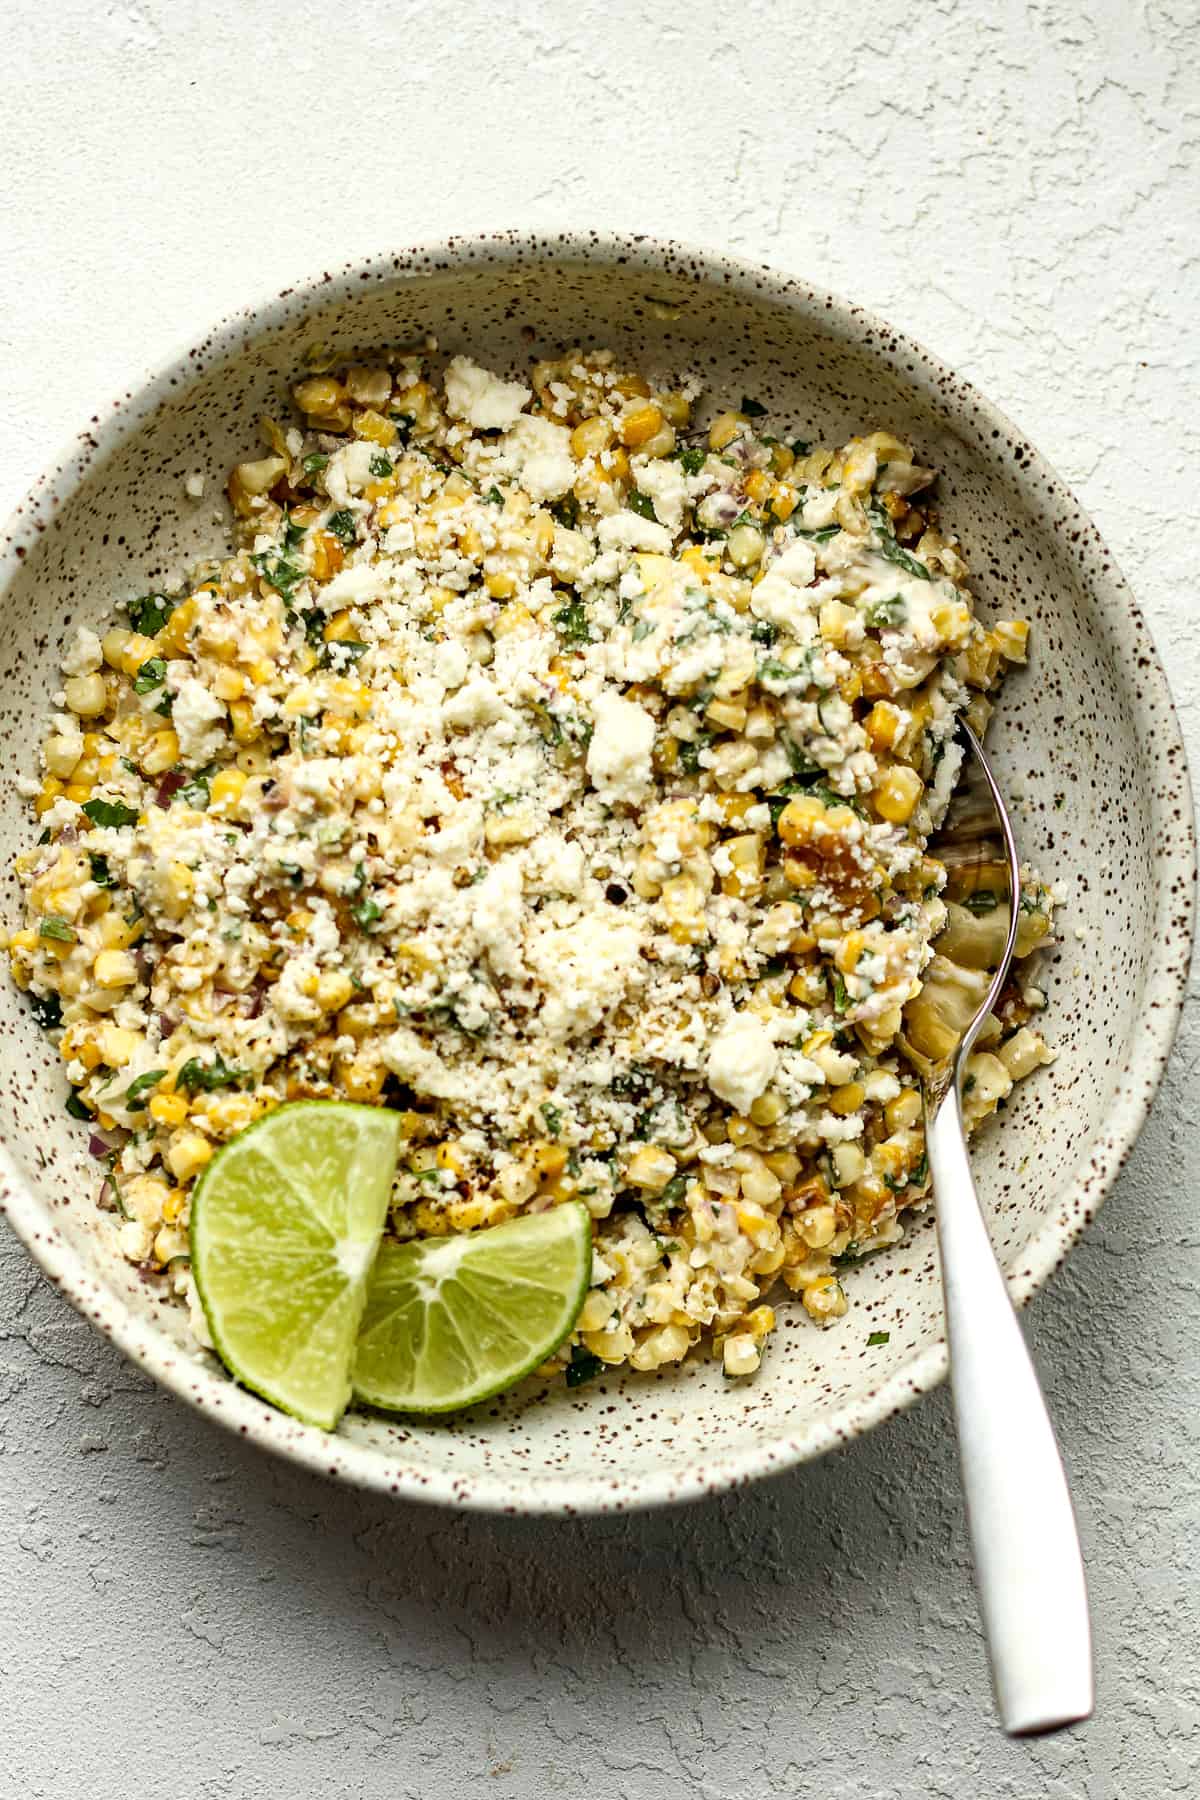 A bowl of Mexican street corn.